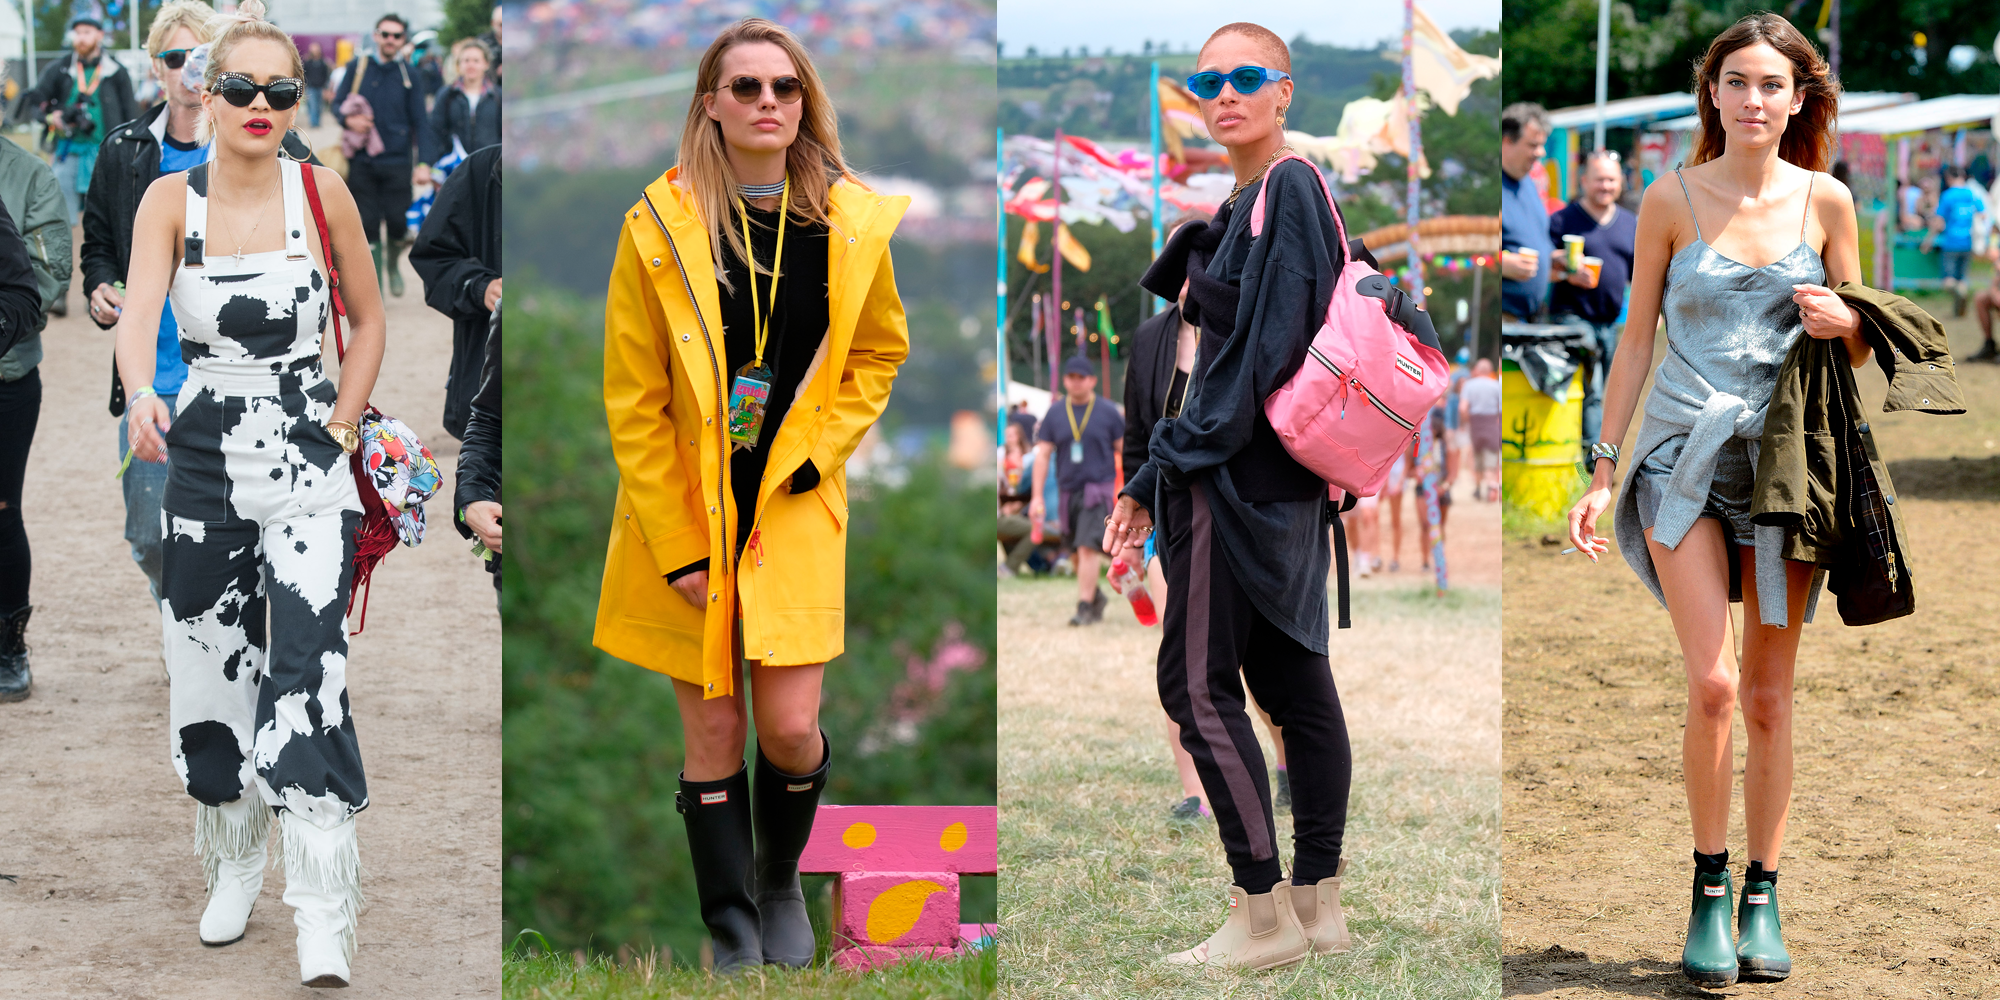 Best Festival Clothing Websites (plus Make Up and Accessories